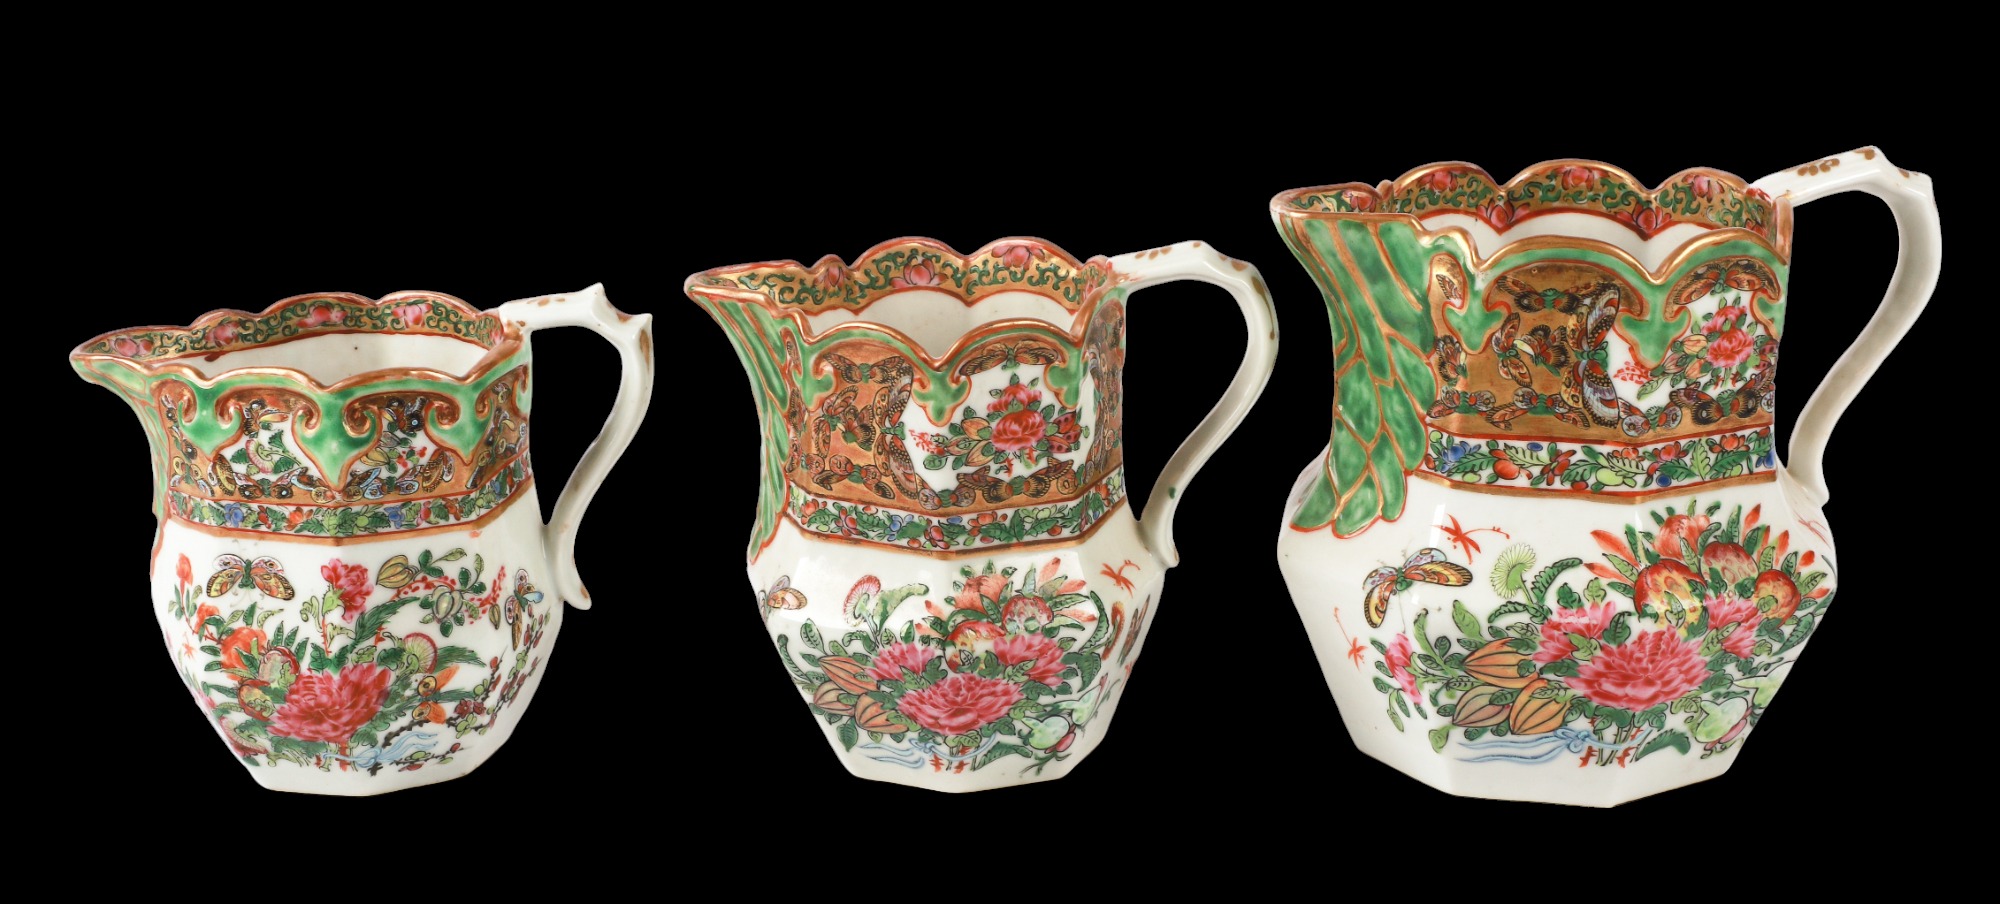  3 Chinese Famille Rose porcelain 3ca54b